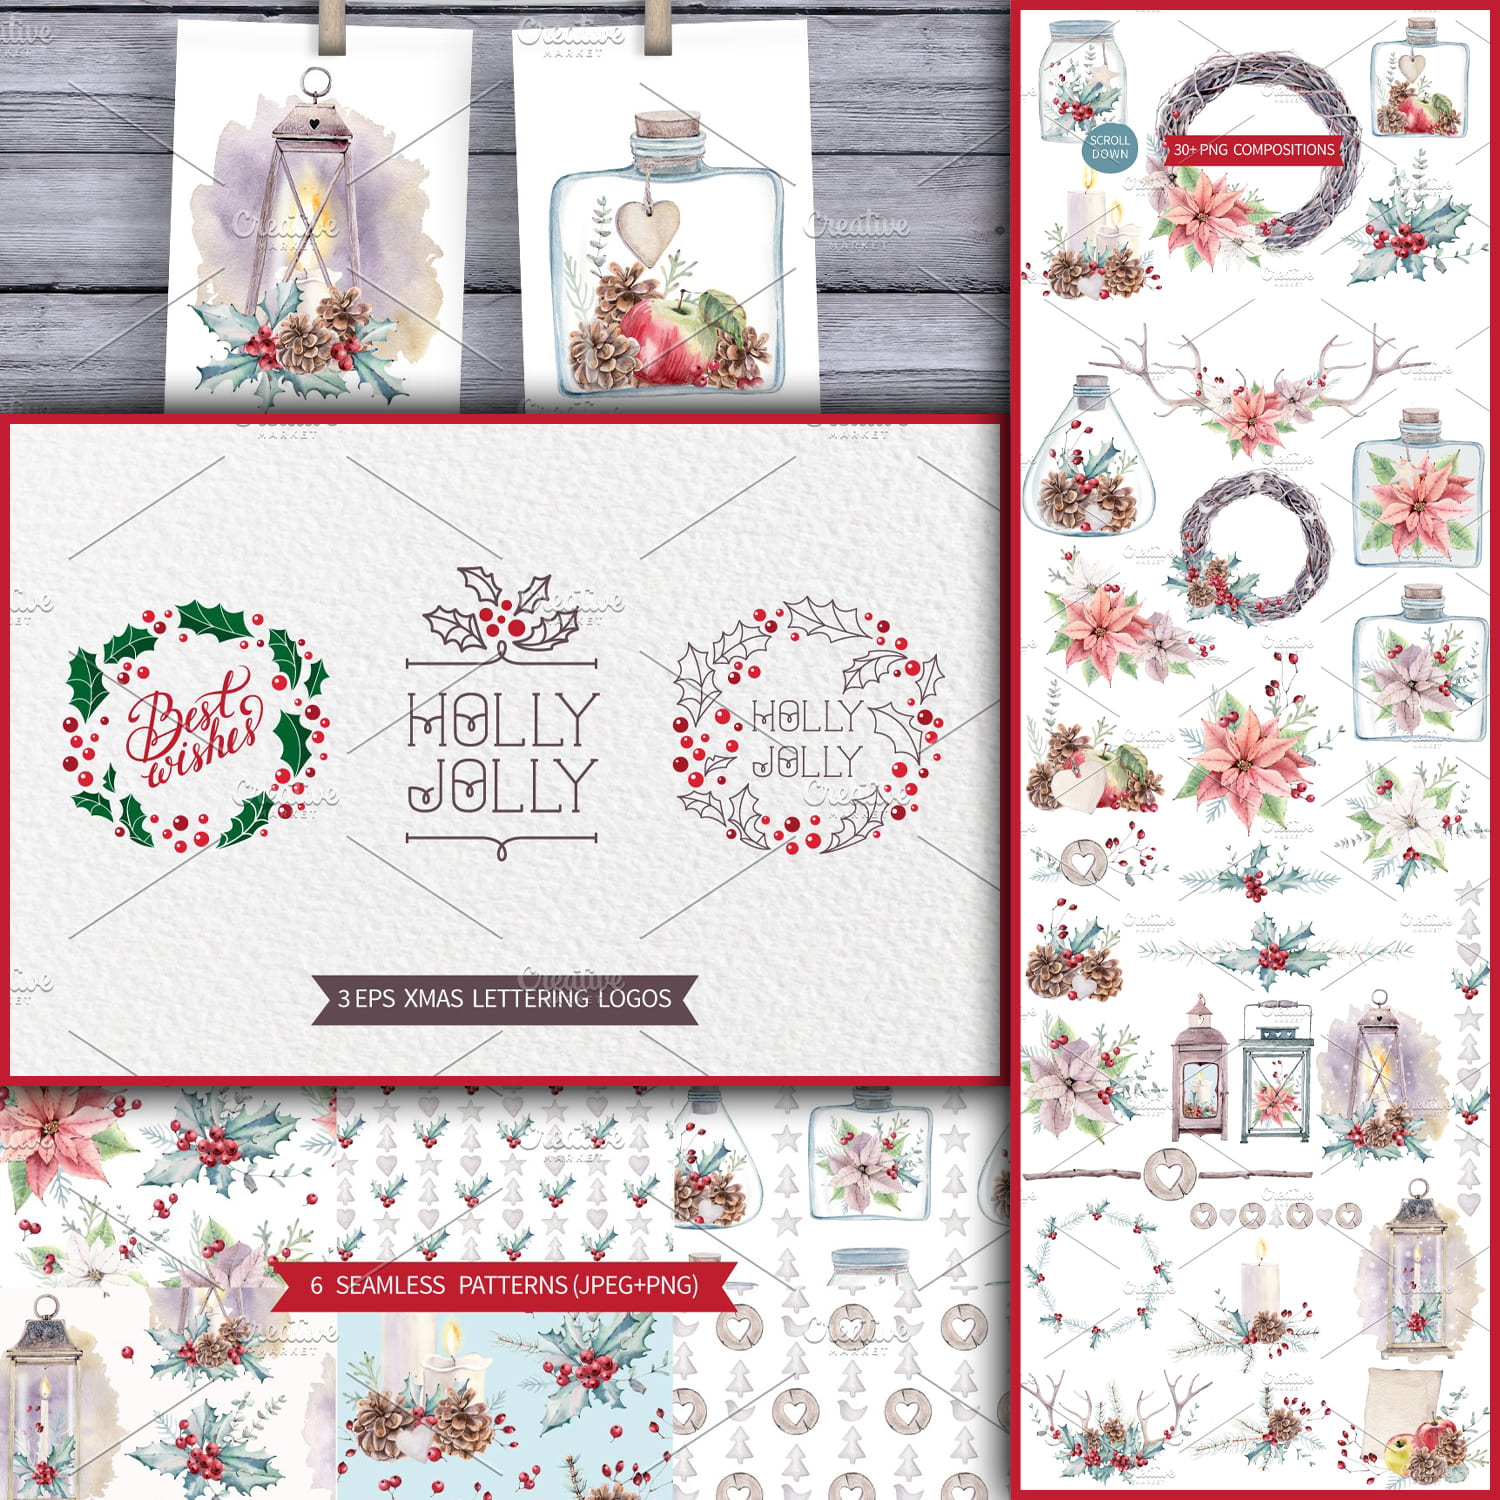 Holly Jolly Watercolor Set Cover.